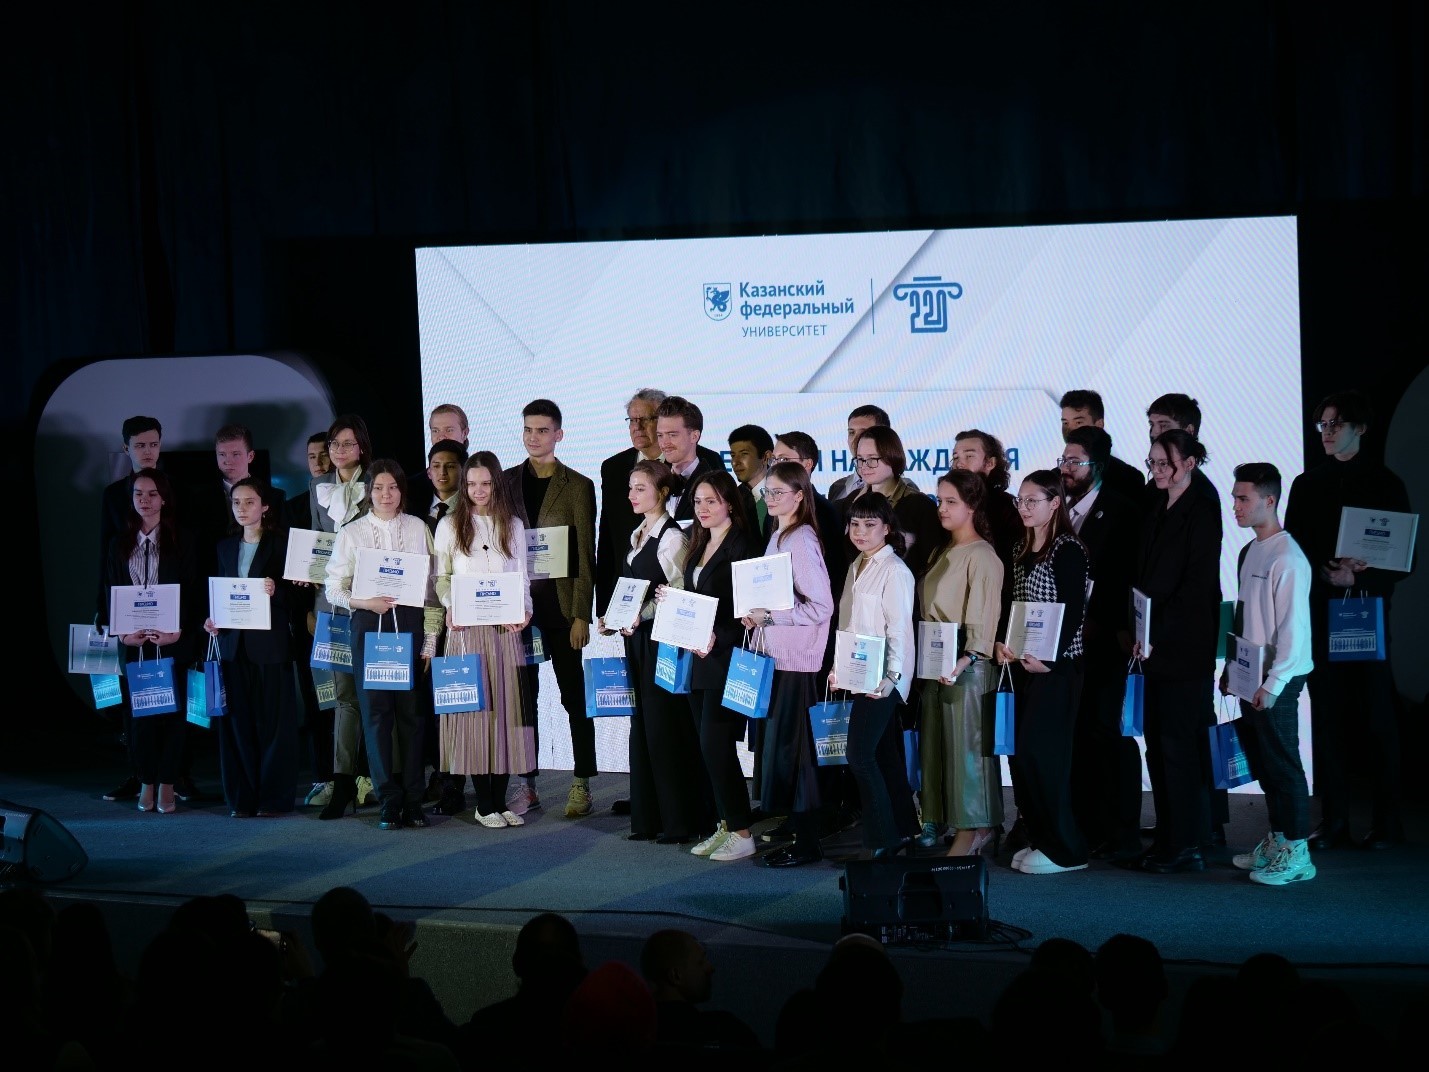 Laboratory of Intelligent Robotics Systems' members were awarded for their achievements in science ,ITIS, LIRS, robotics